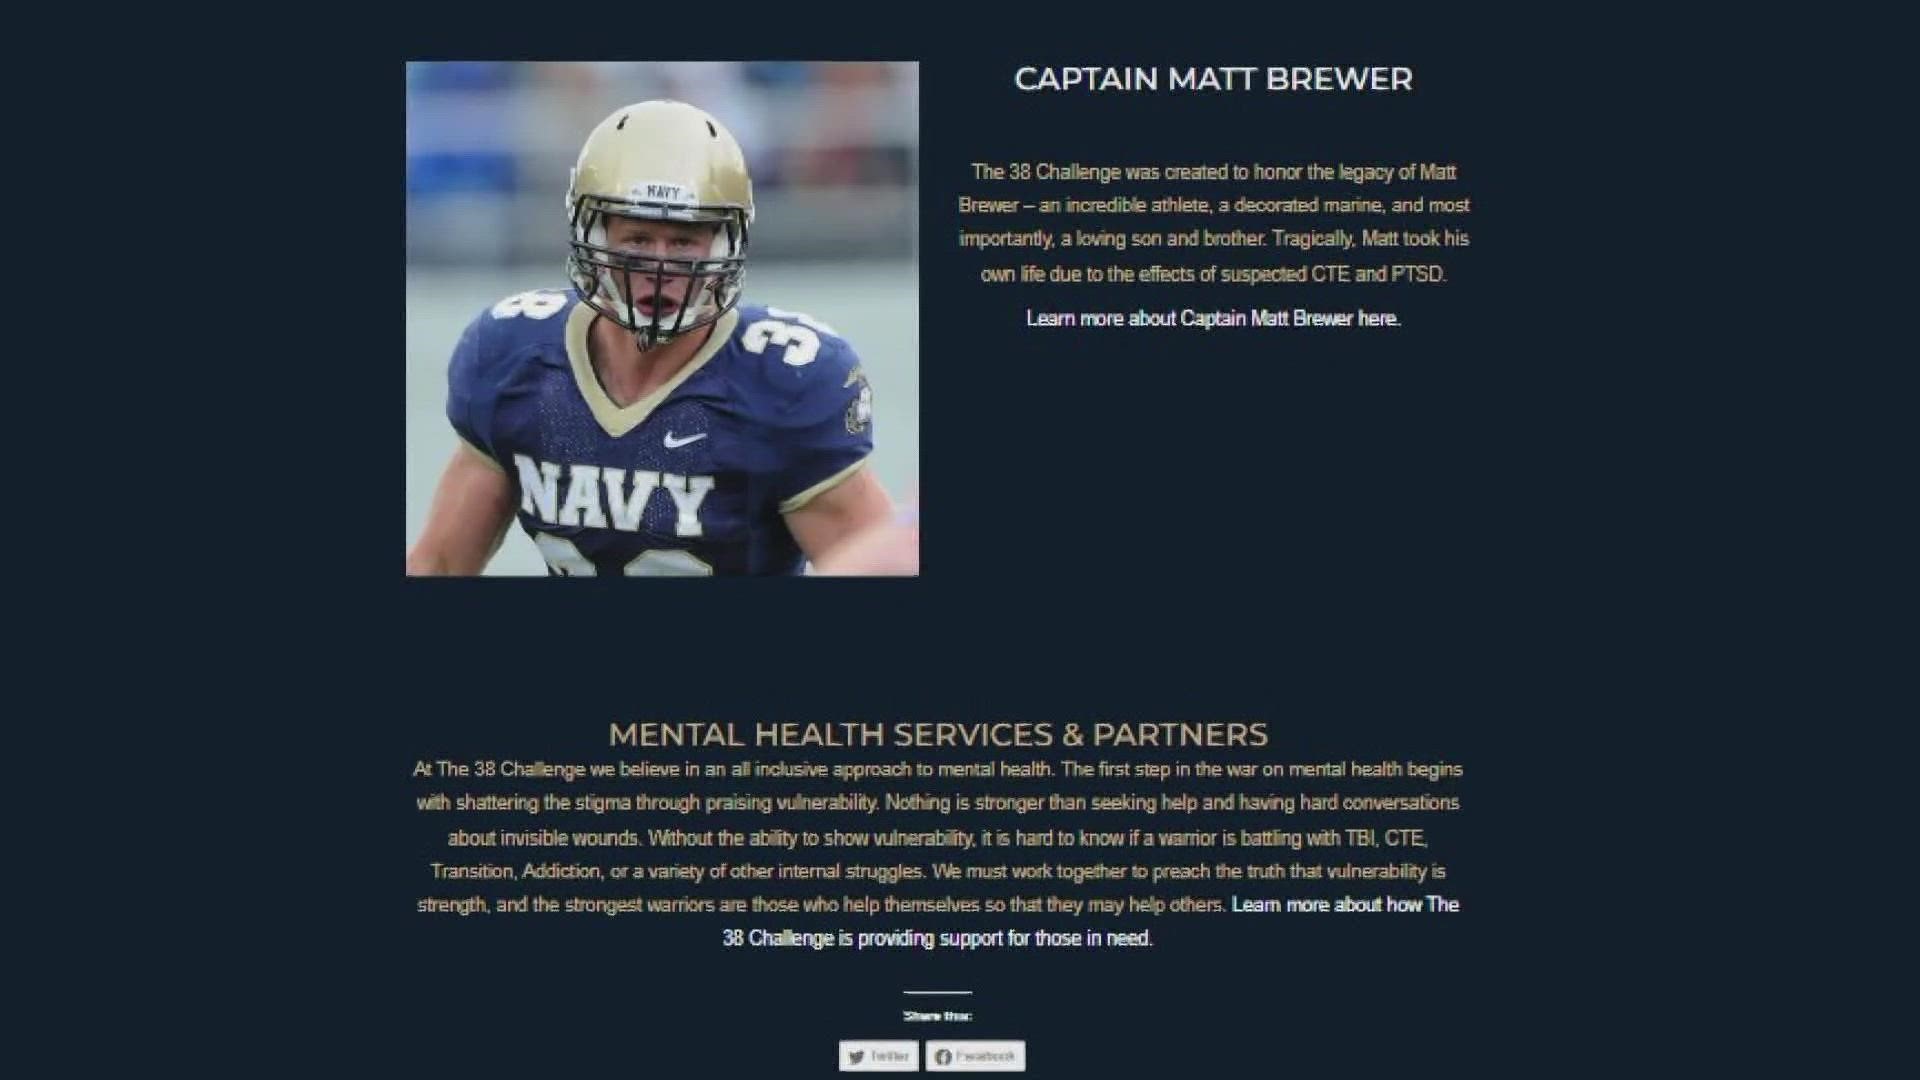 After his brother, Captain Mathew Brewer, died by suicide due to the effects of suspected CTE, his brother Brandt McCartney is dedicated to raising awareness.